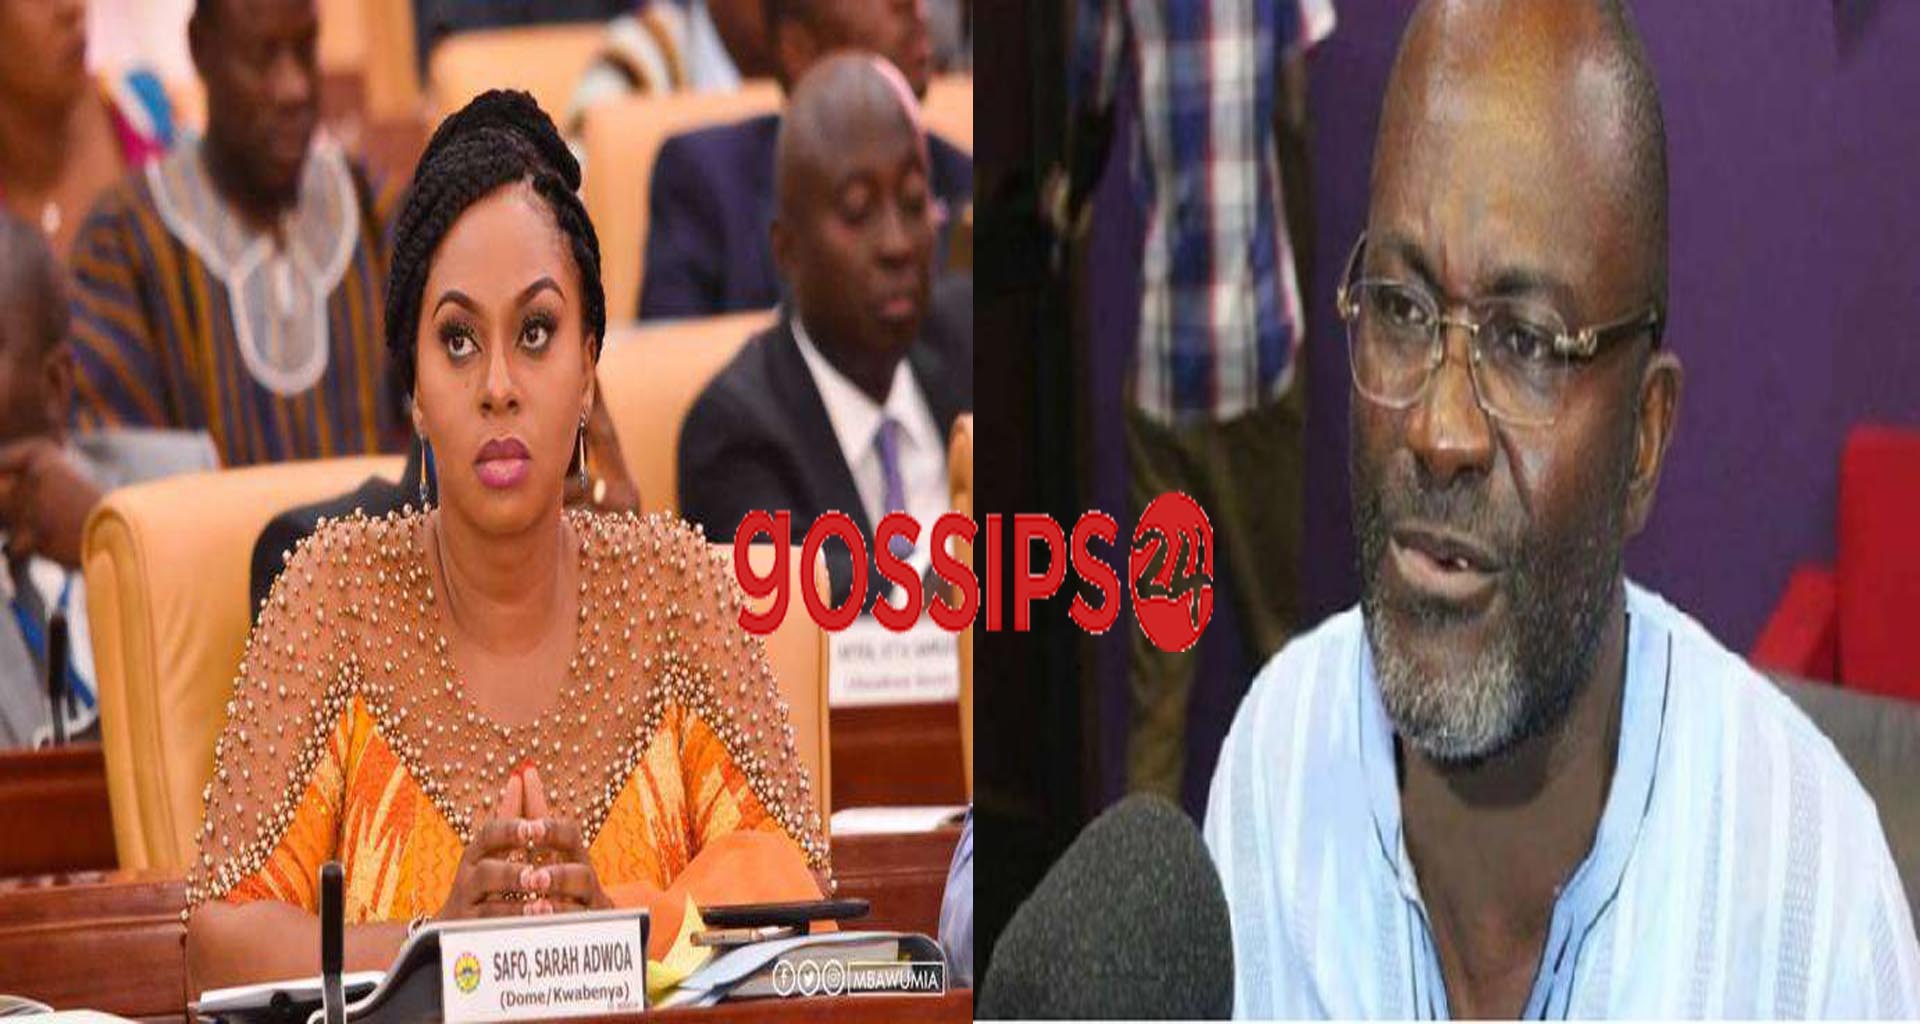 NDC has planned to kill Adwoa Sarfo - Kenned Agyapong